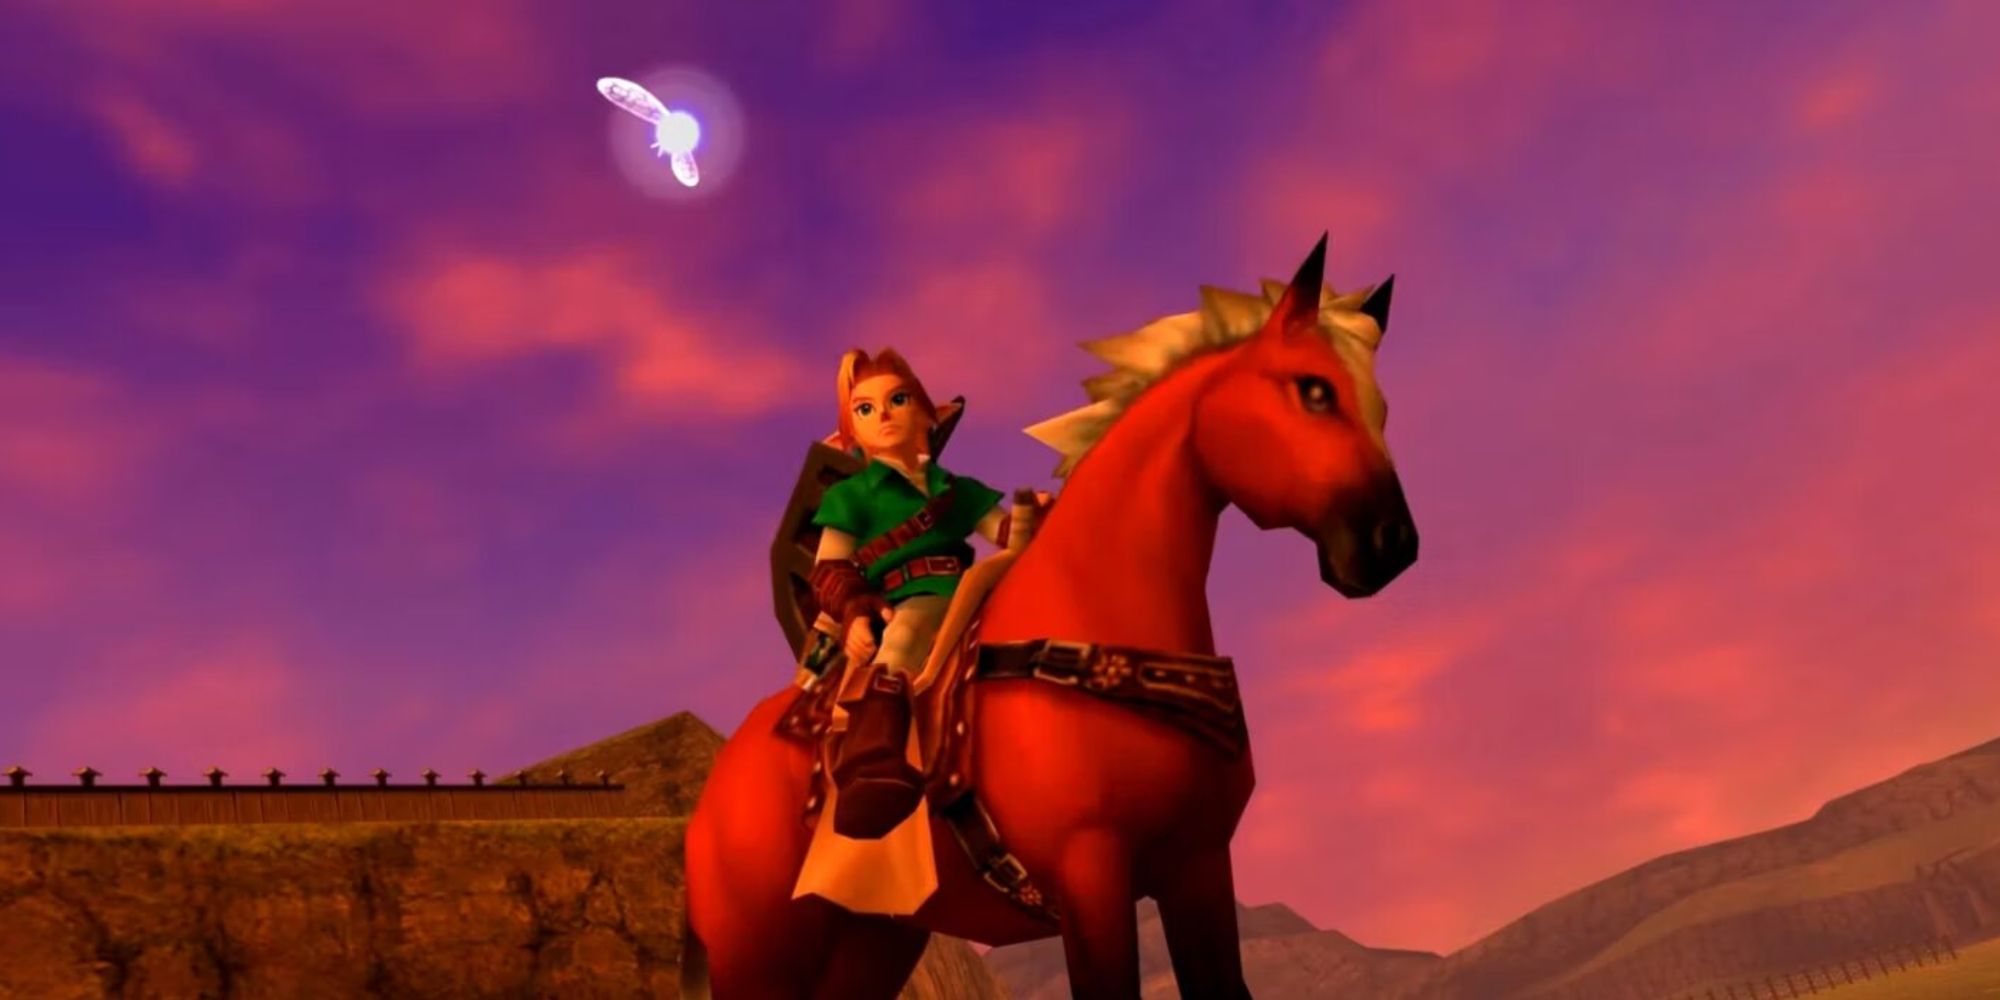 Connect with the butterfly behind Epona in The Legend of Zelda: Ocarina of Time